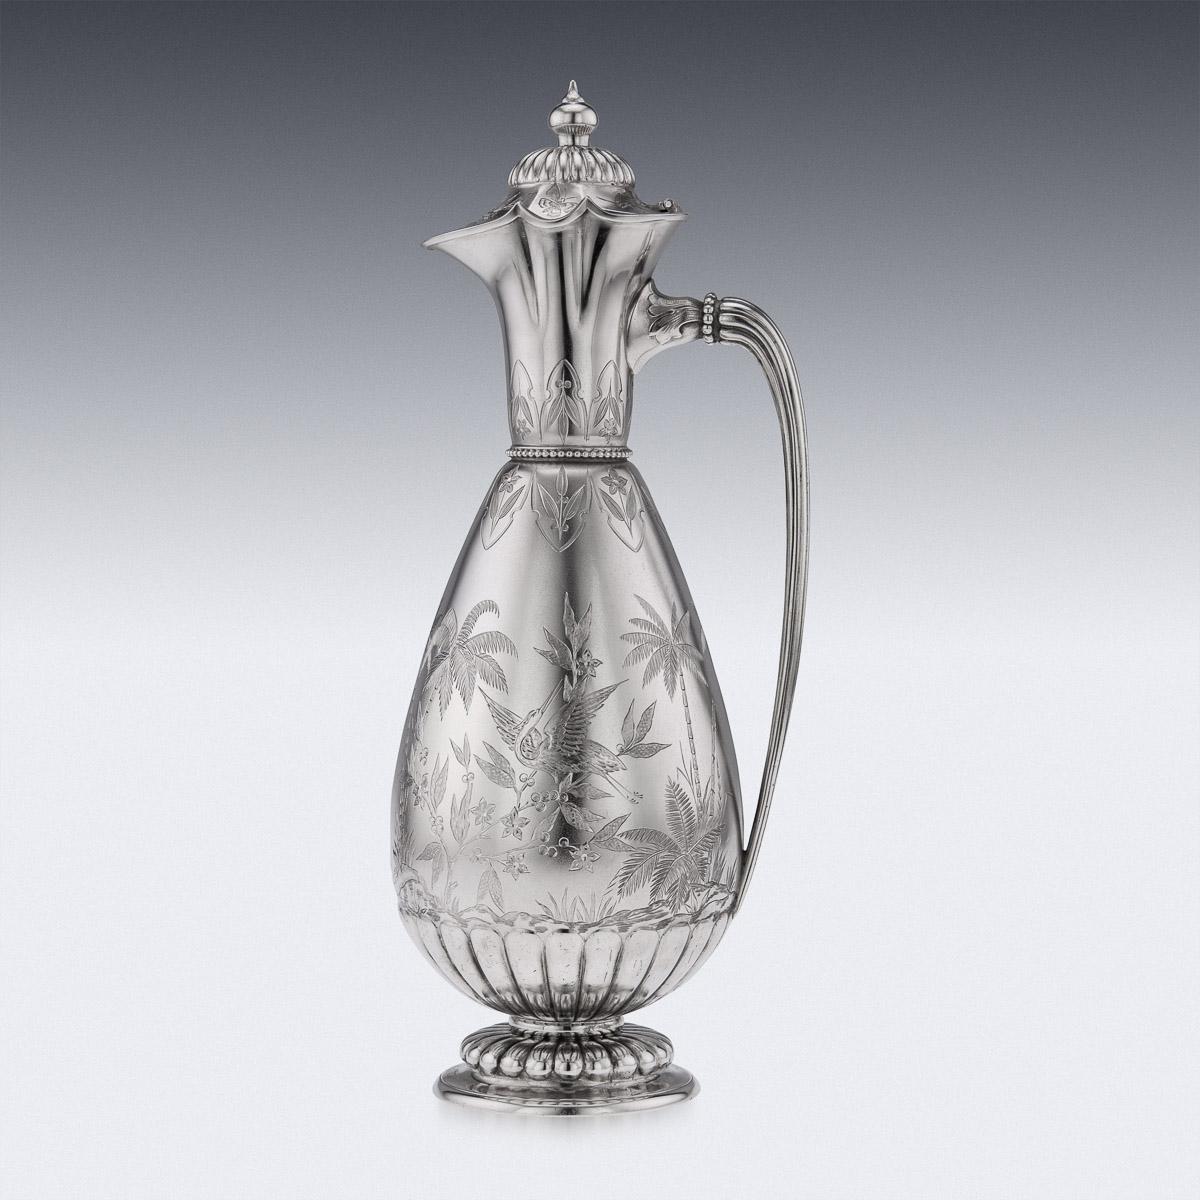 19th Century Victorian Aesthetic movement silver lidded wine jug, the bulbous body beautifully hand engraved with chinoiserie scenes, bamboo trees and exotic birds, the neck decorated with leaf decoration, body mounted with a shaped handle and a